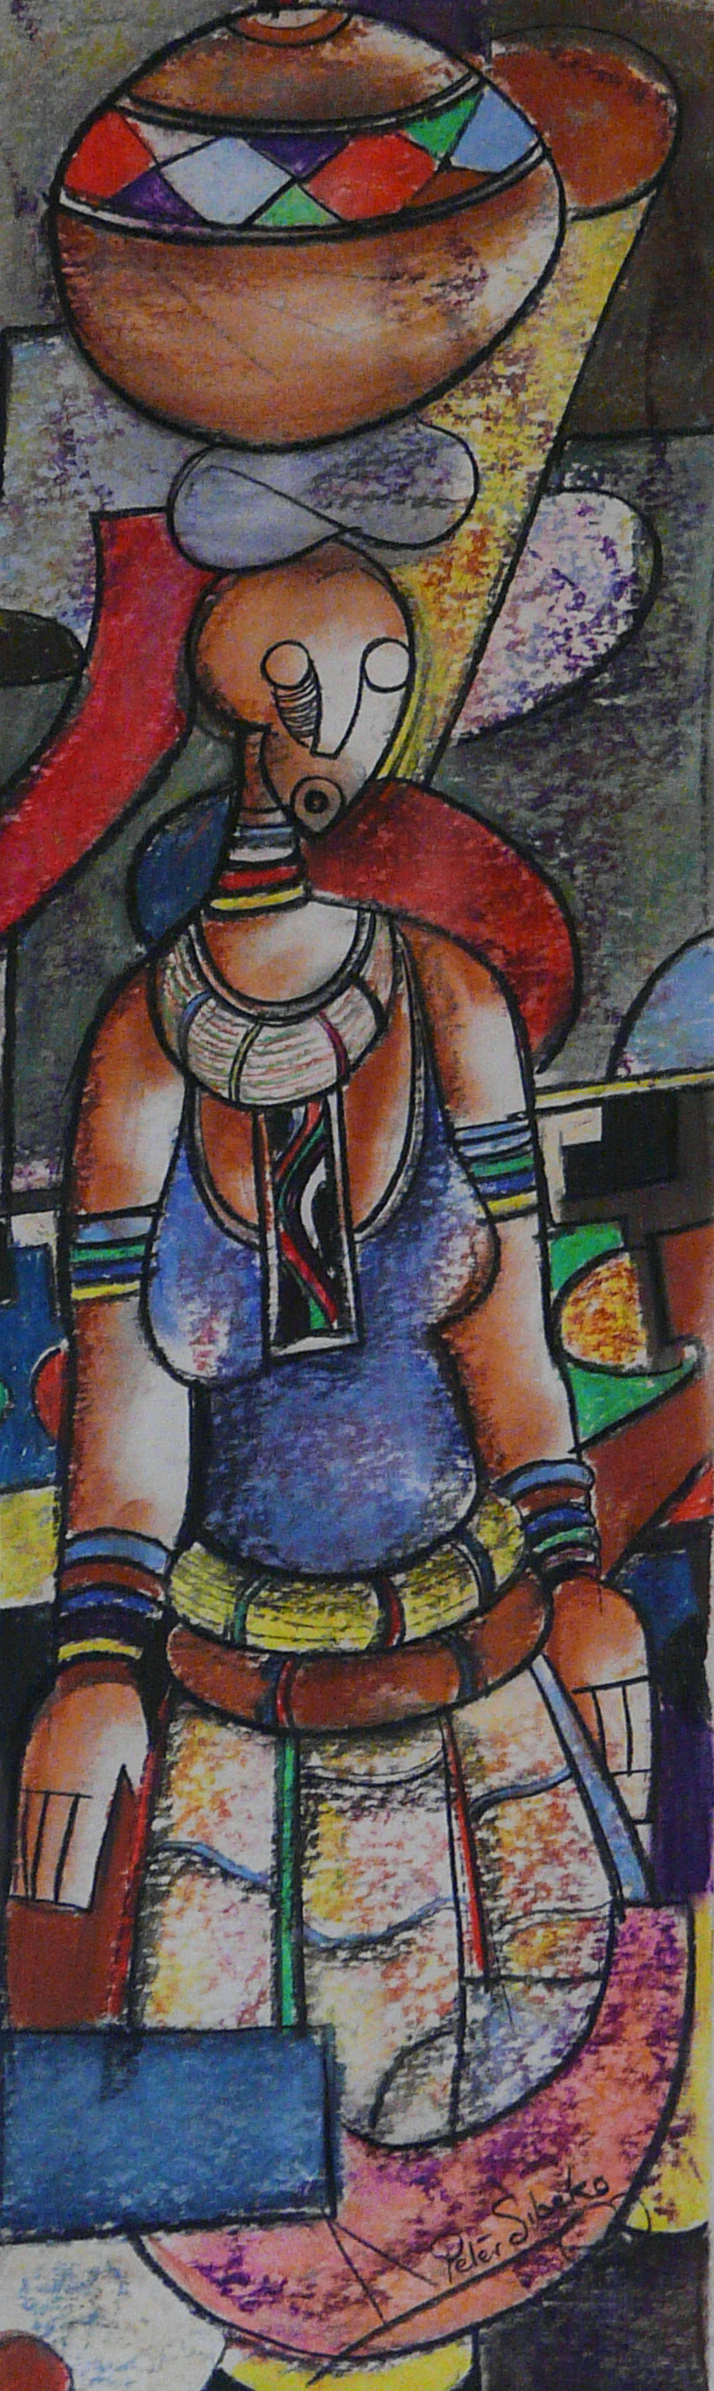 Working African Woman